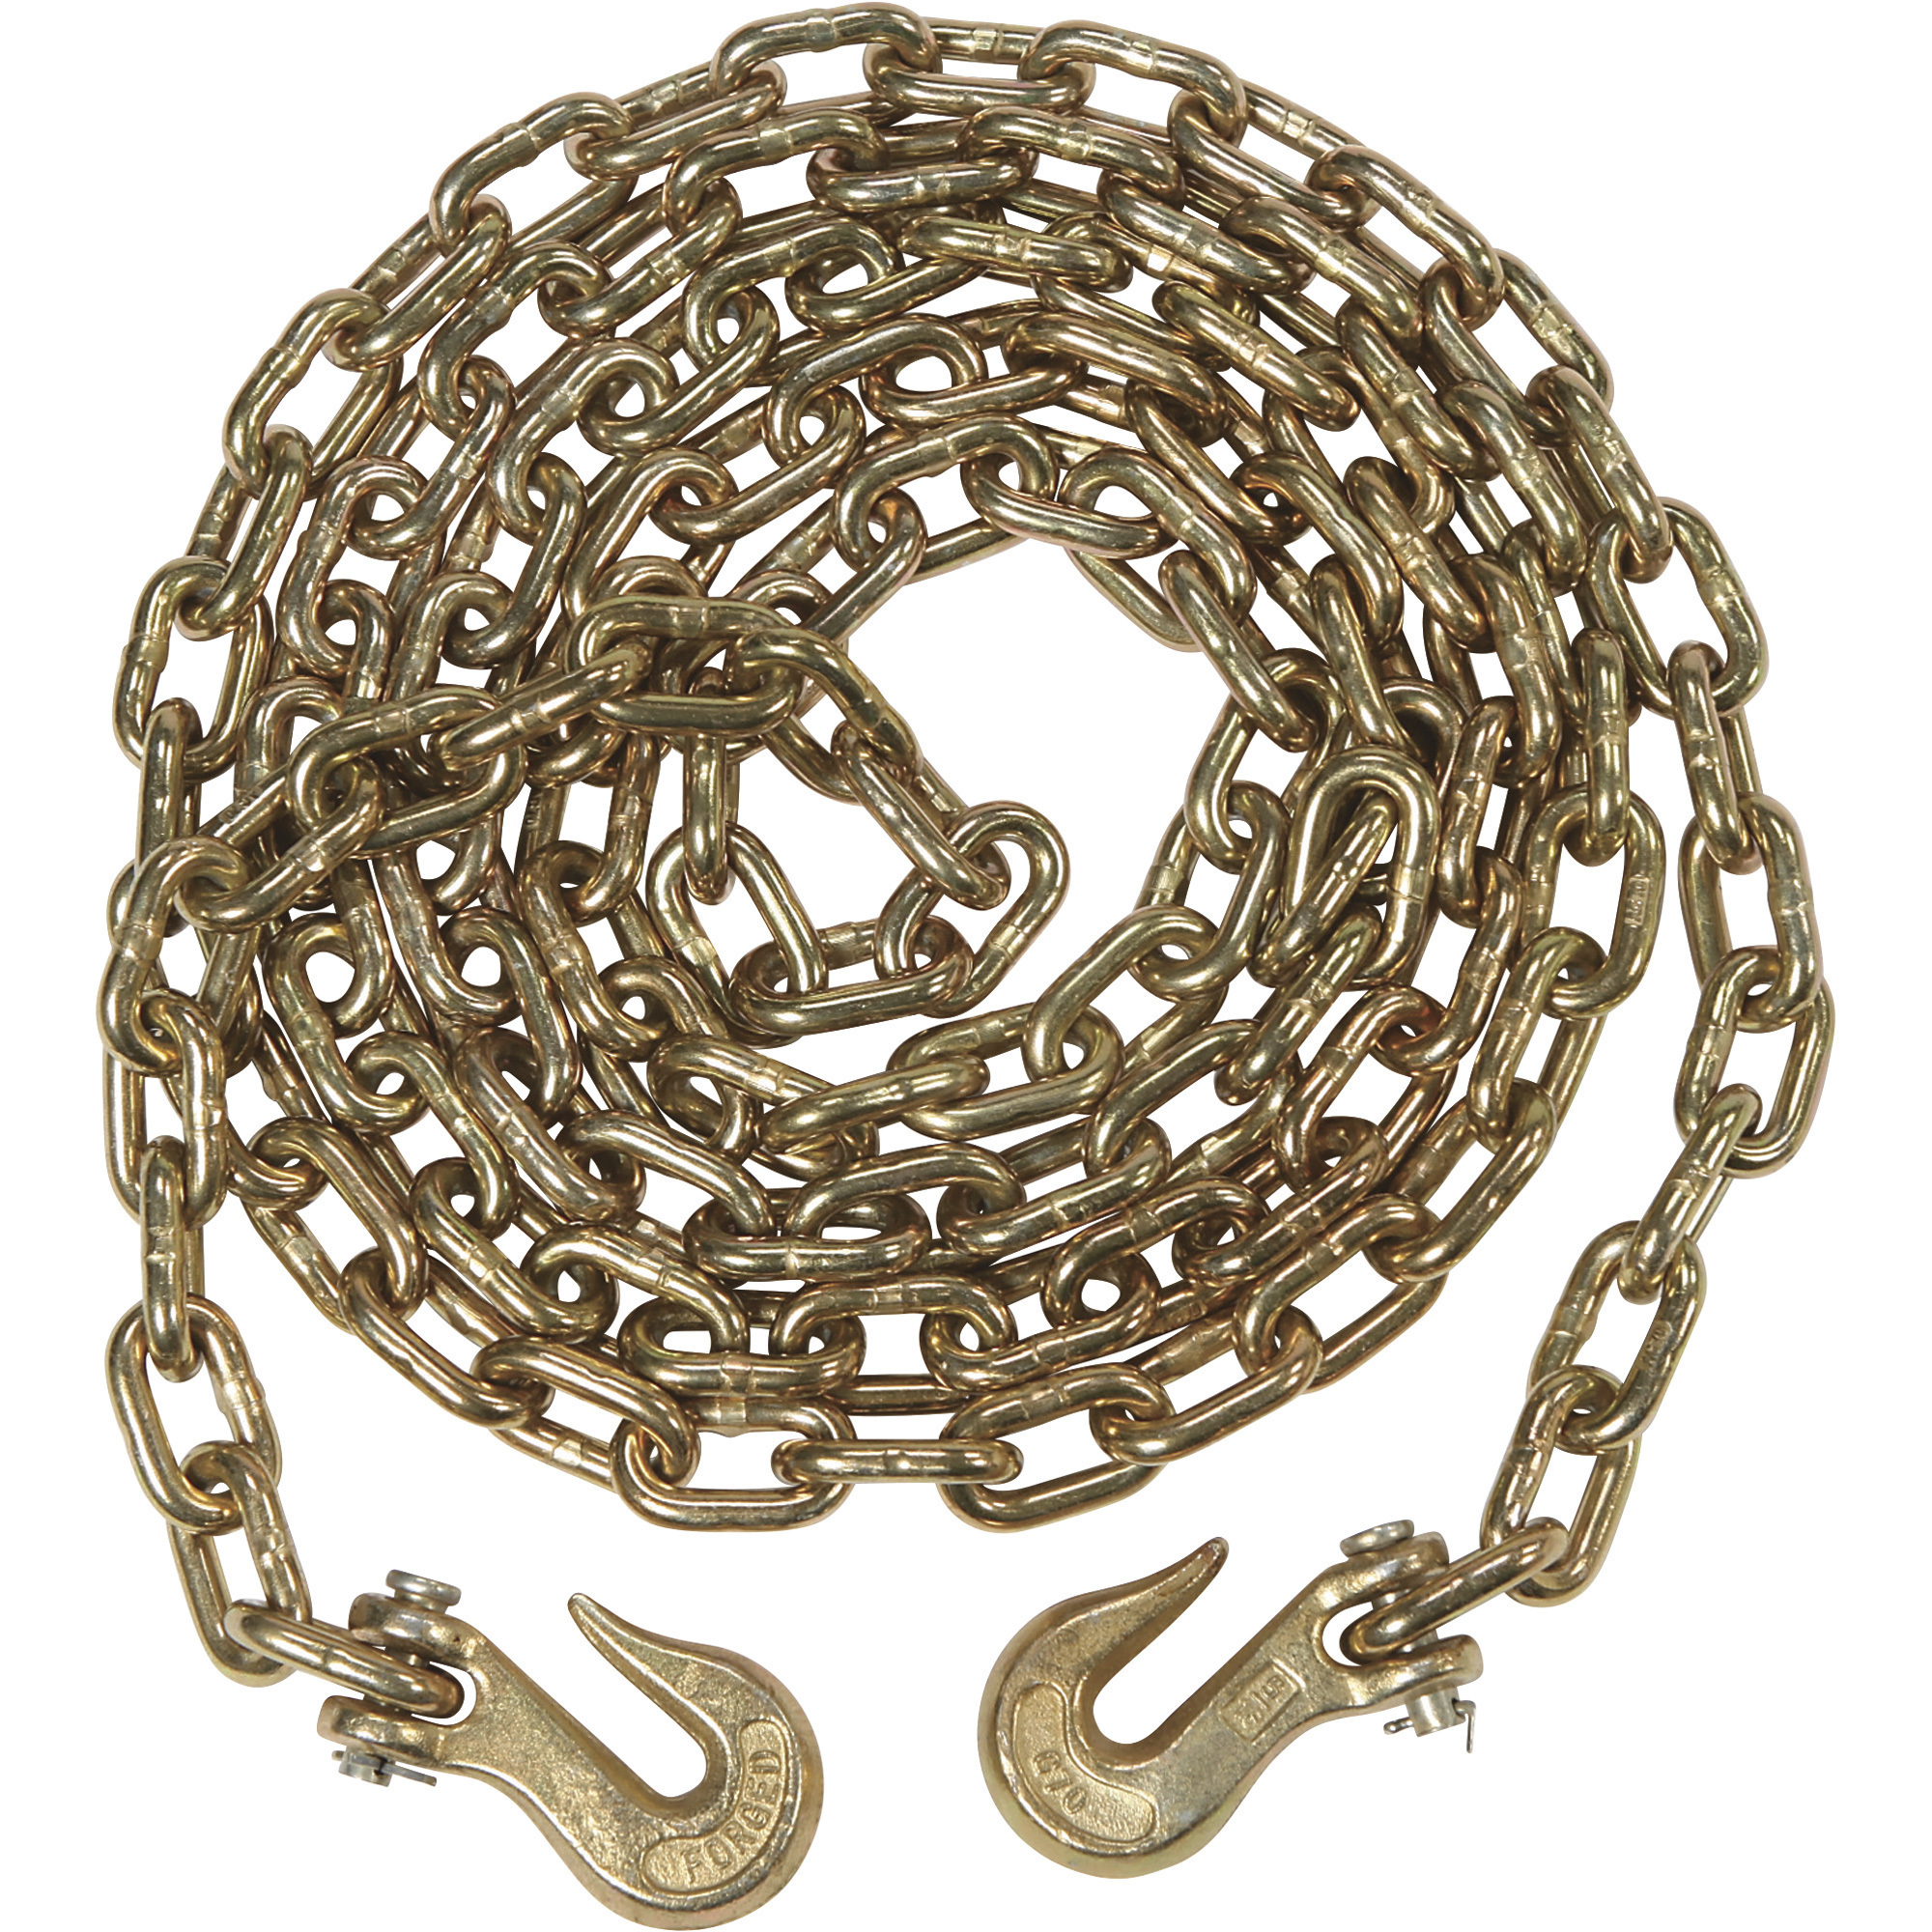 KingChain 5/16in. x 14ft. Grade 70 (G70) Transport Tow Chain with 5/16in.  Clevis Grab Hooks (x2), 4700 Lbs. Safe Work Load